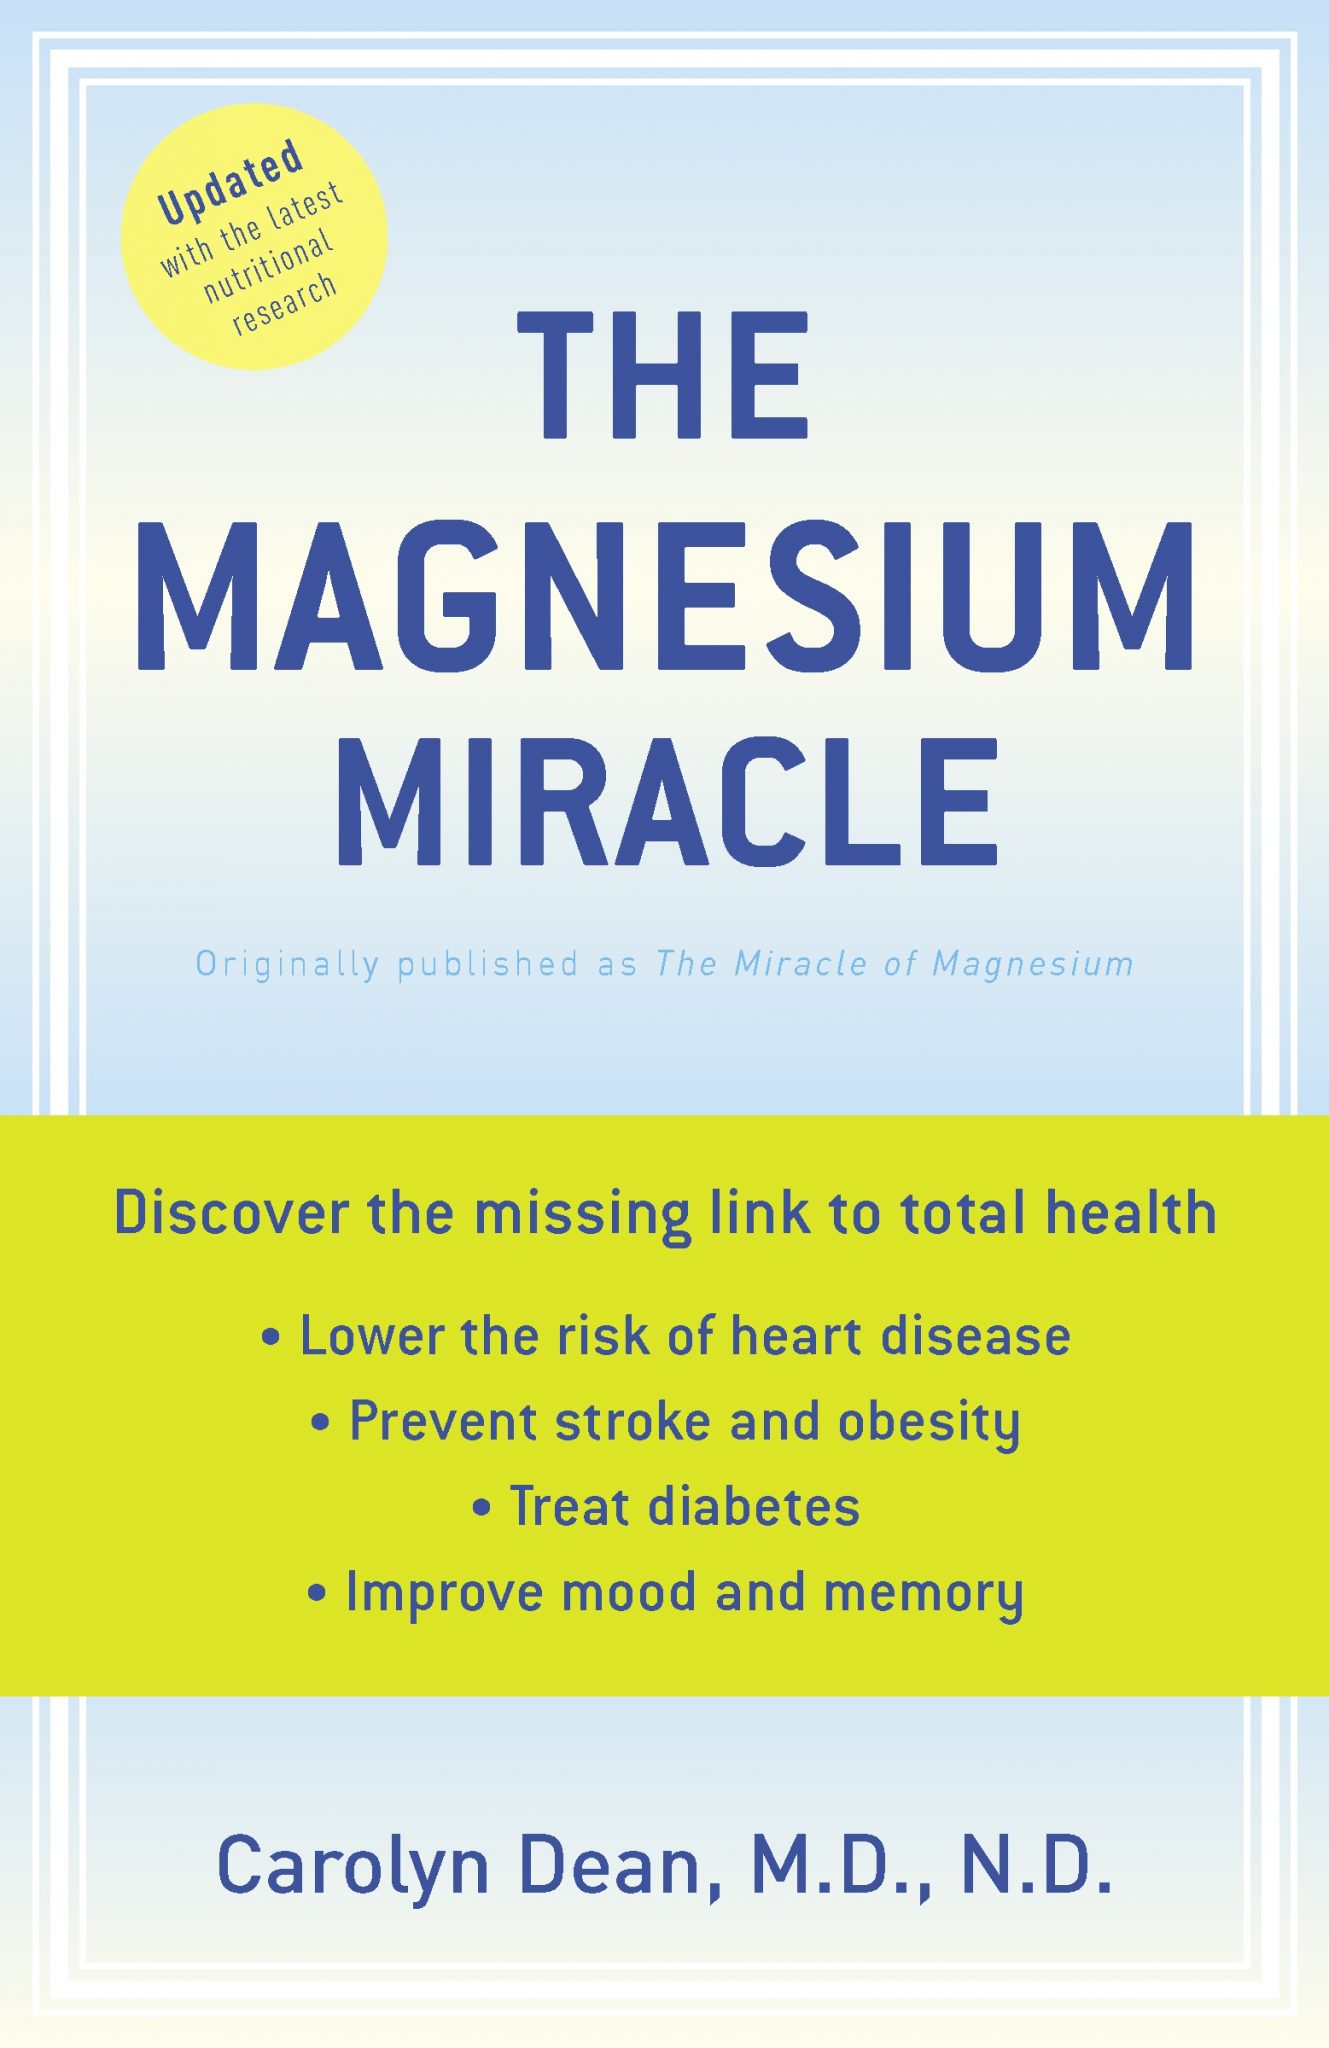 MAGNESIUM MIRACLE.cover